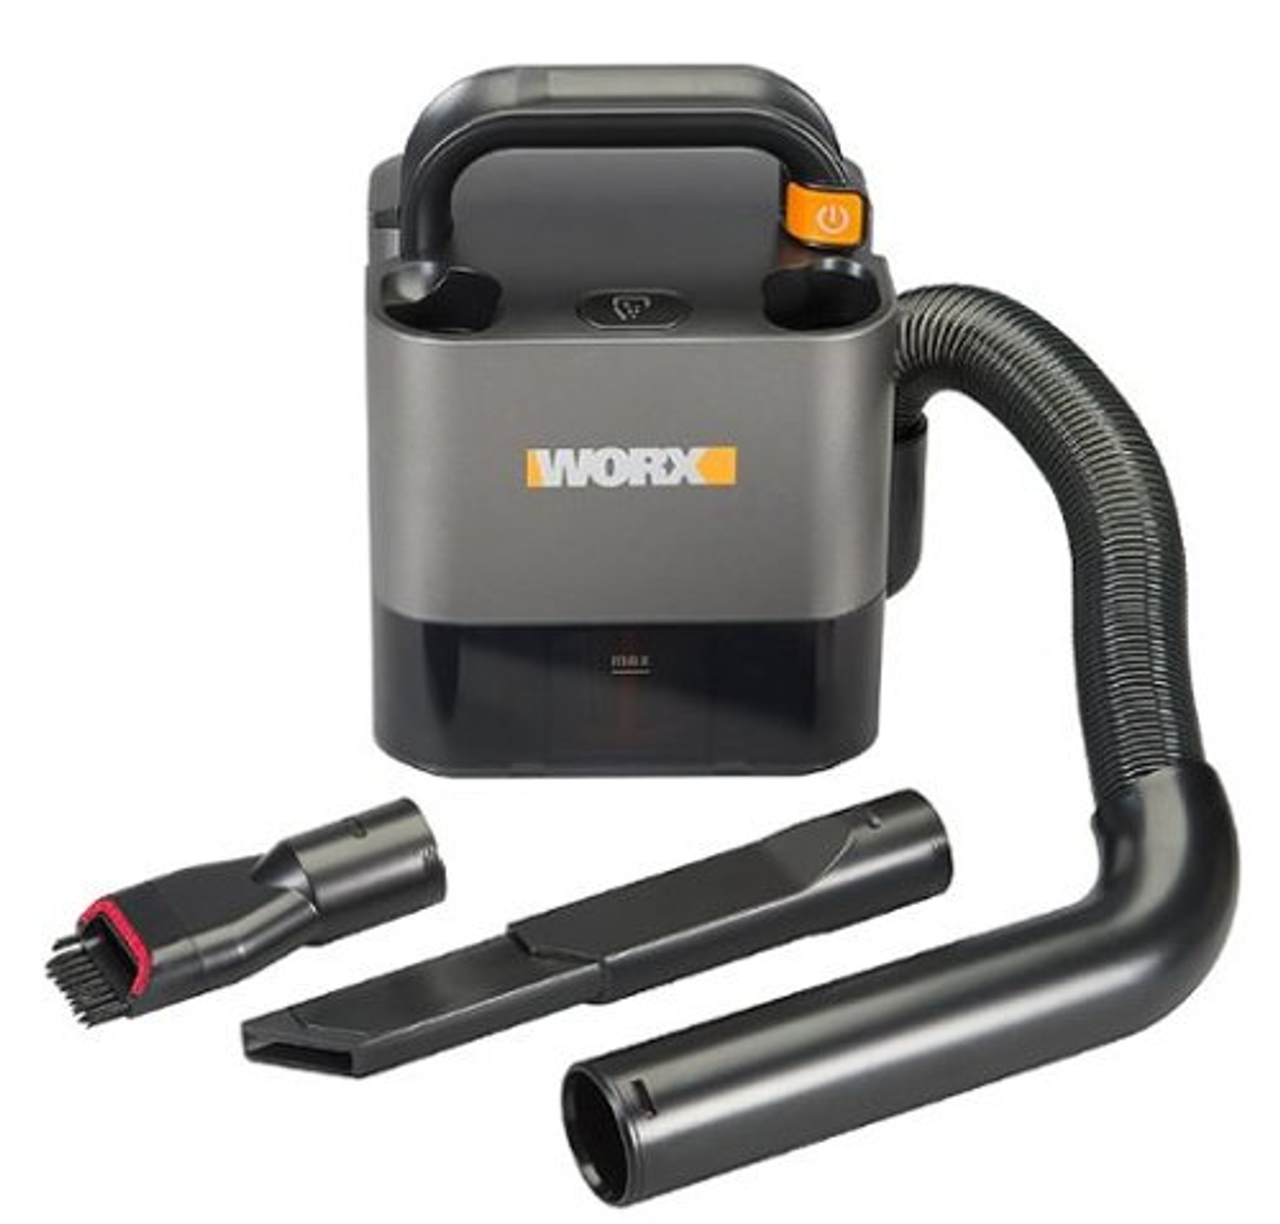 Worx WX030L 20V Power Share Cordless Cube Vac Compact Vacuum (Battery & Charger Included)